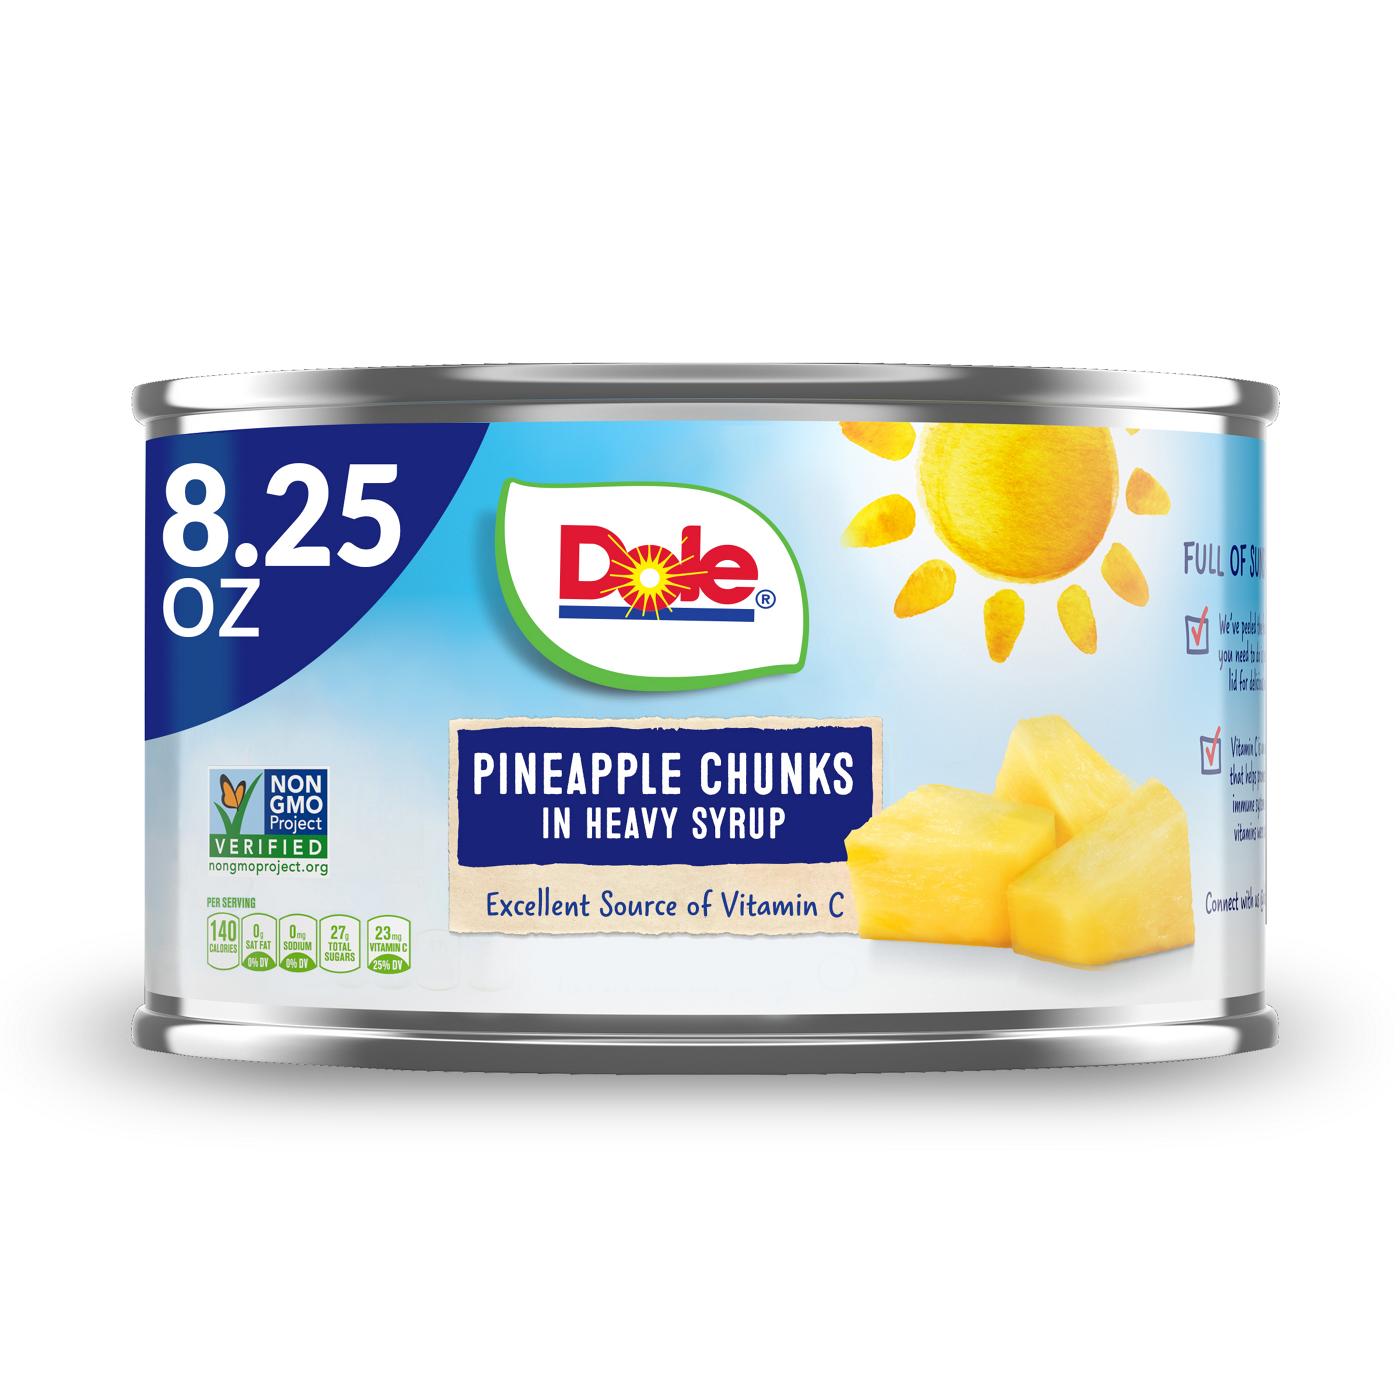 Dole Pineapple Chunks In Heavy Syrup; image 1 of 5